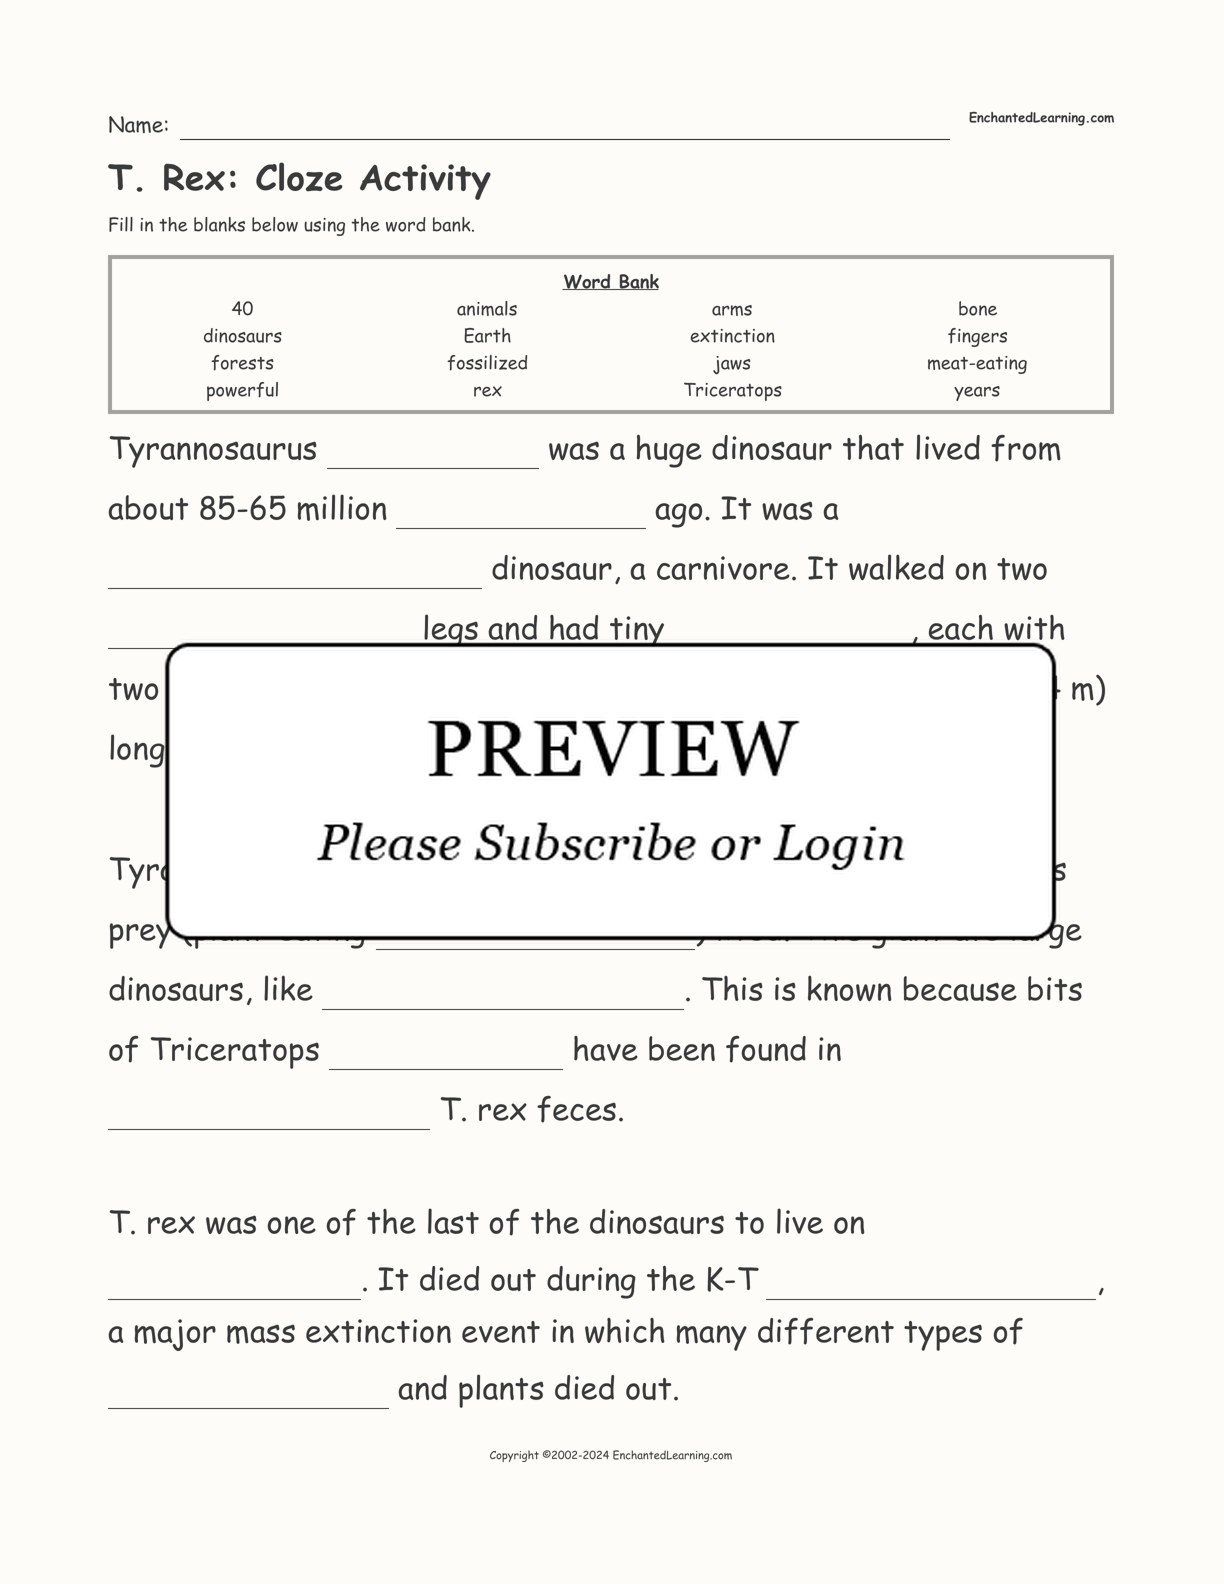 T. Rex: Cloze Activity interactive worksheet page 1